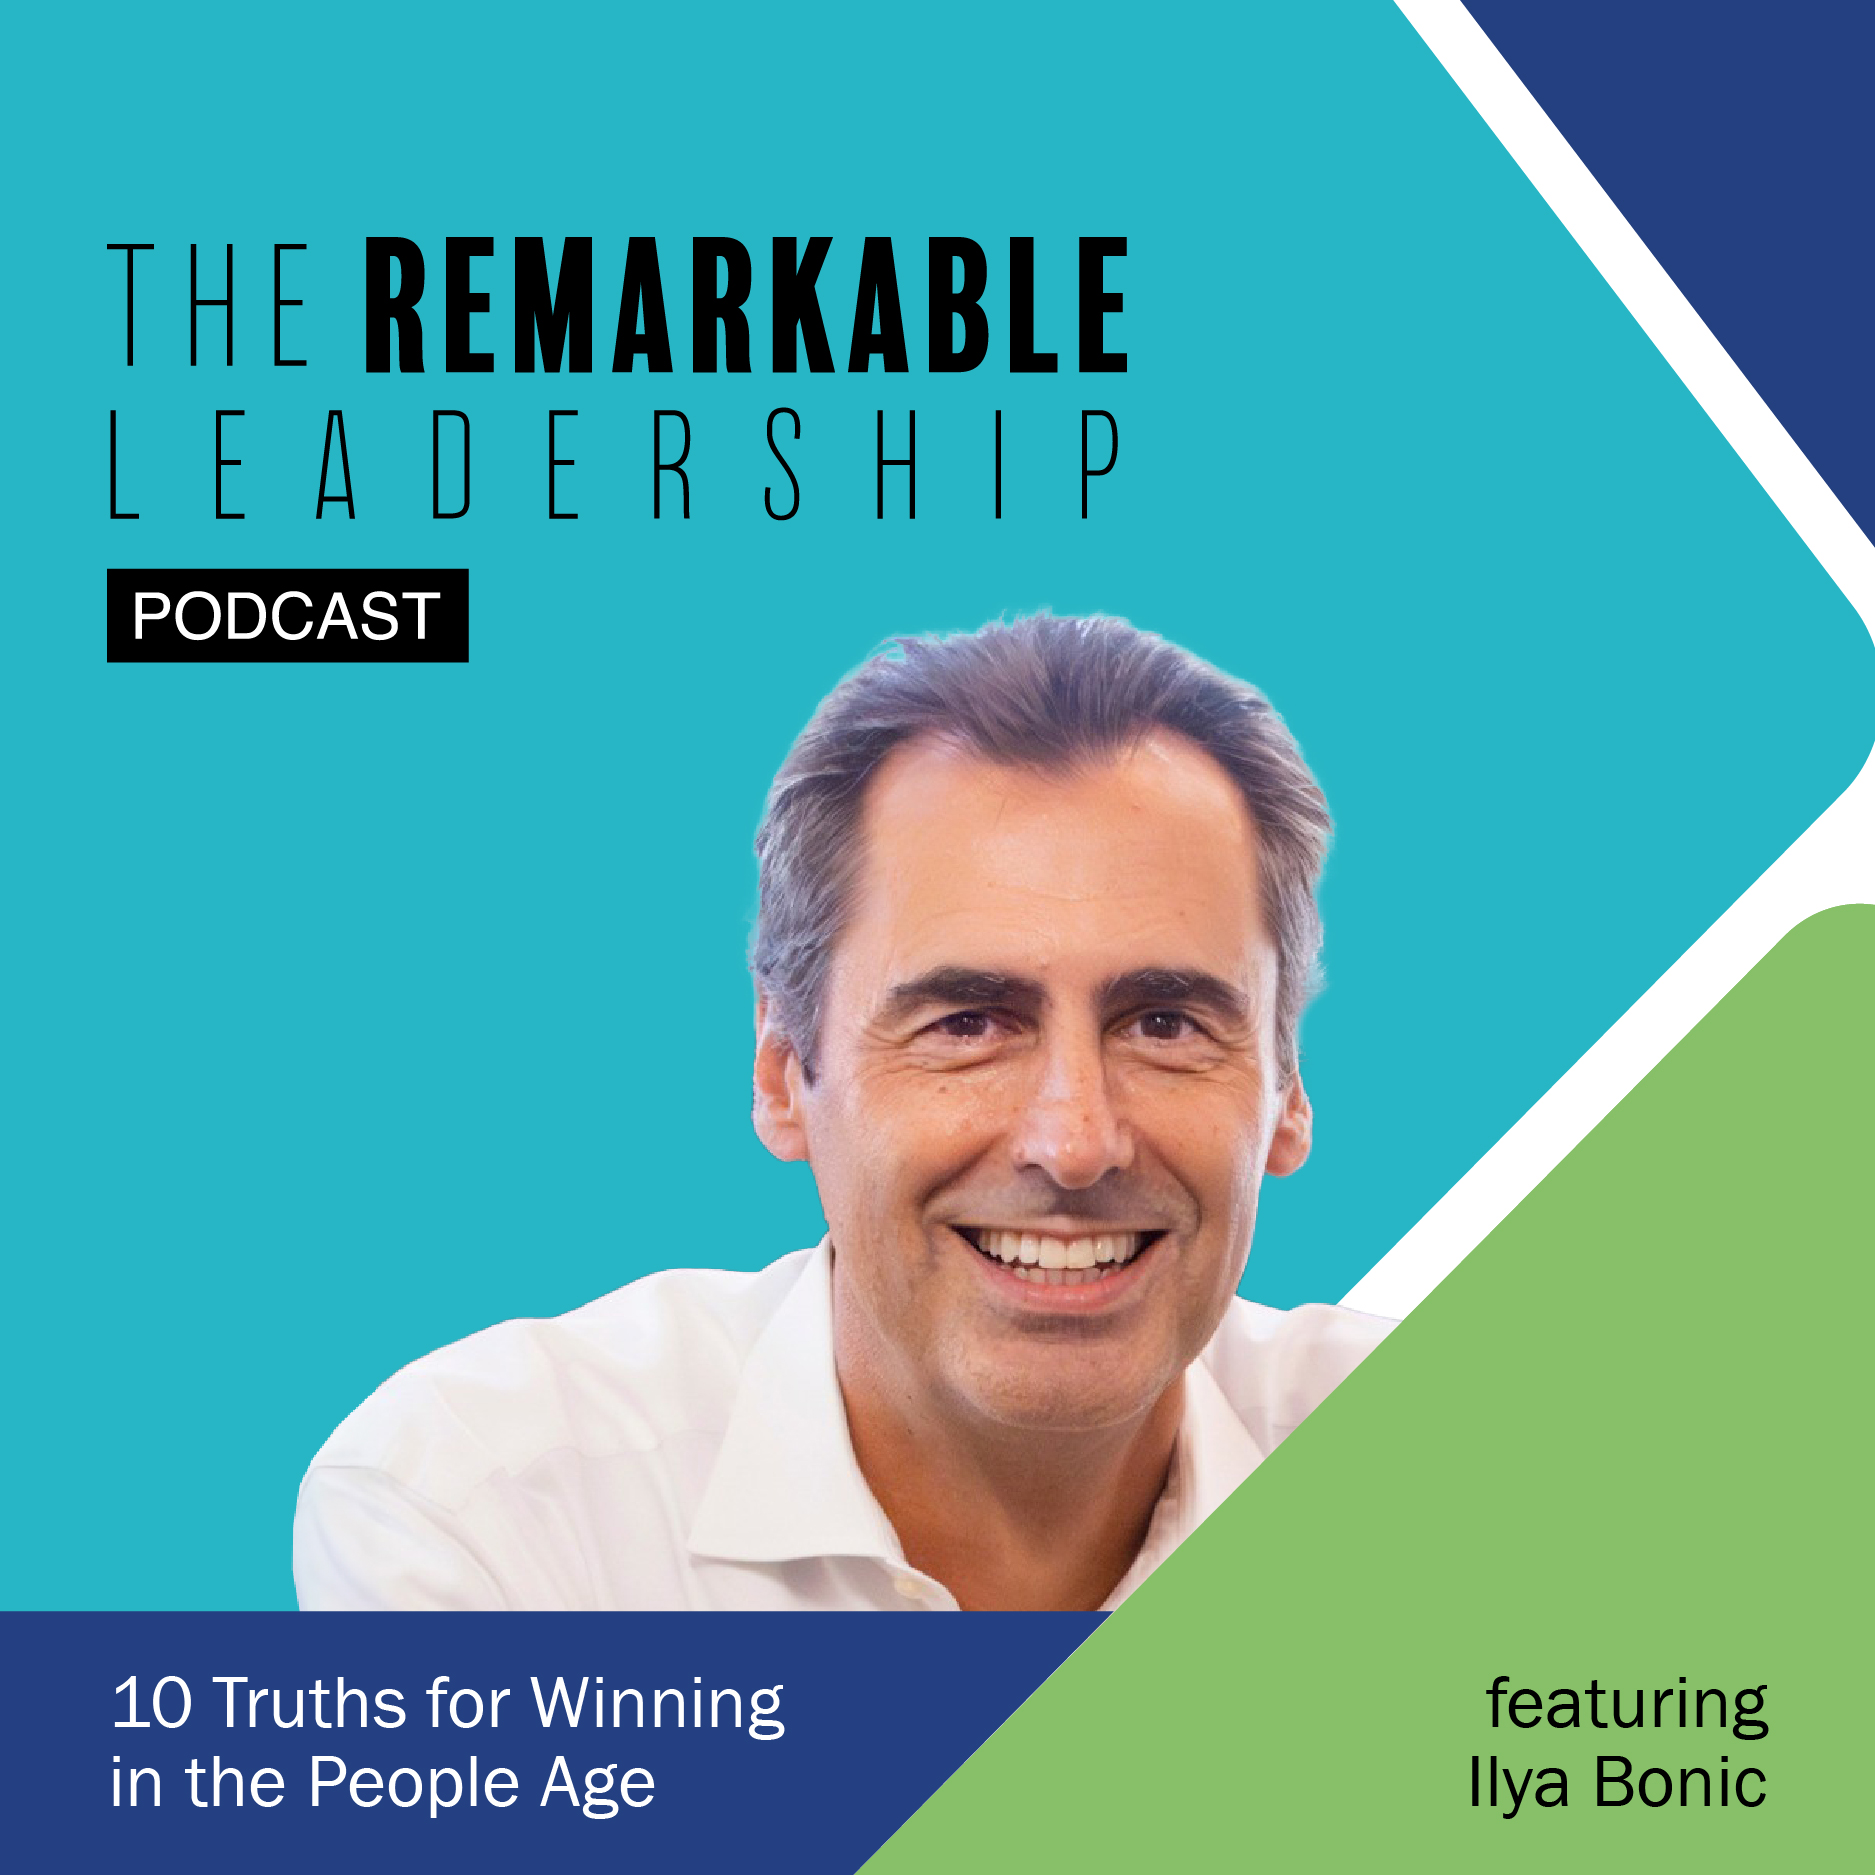 10 Truths for Winning in the People Age with Ilya Bonic